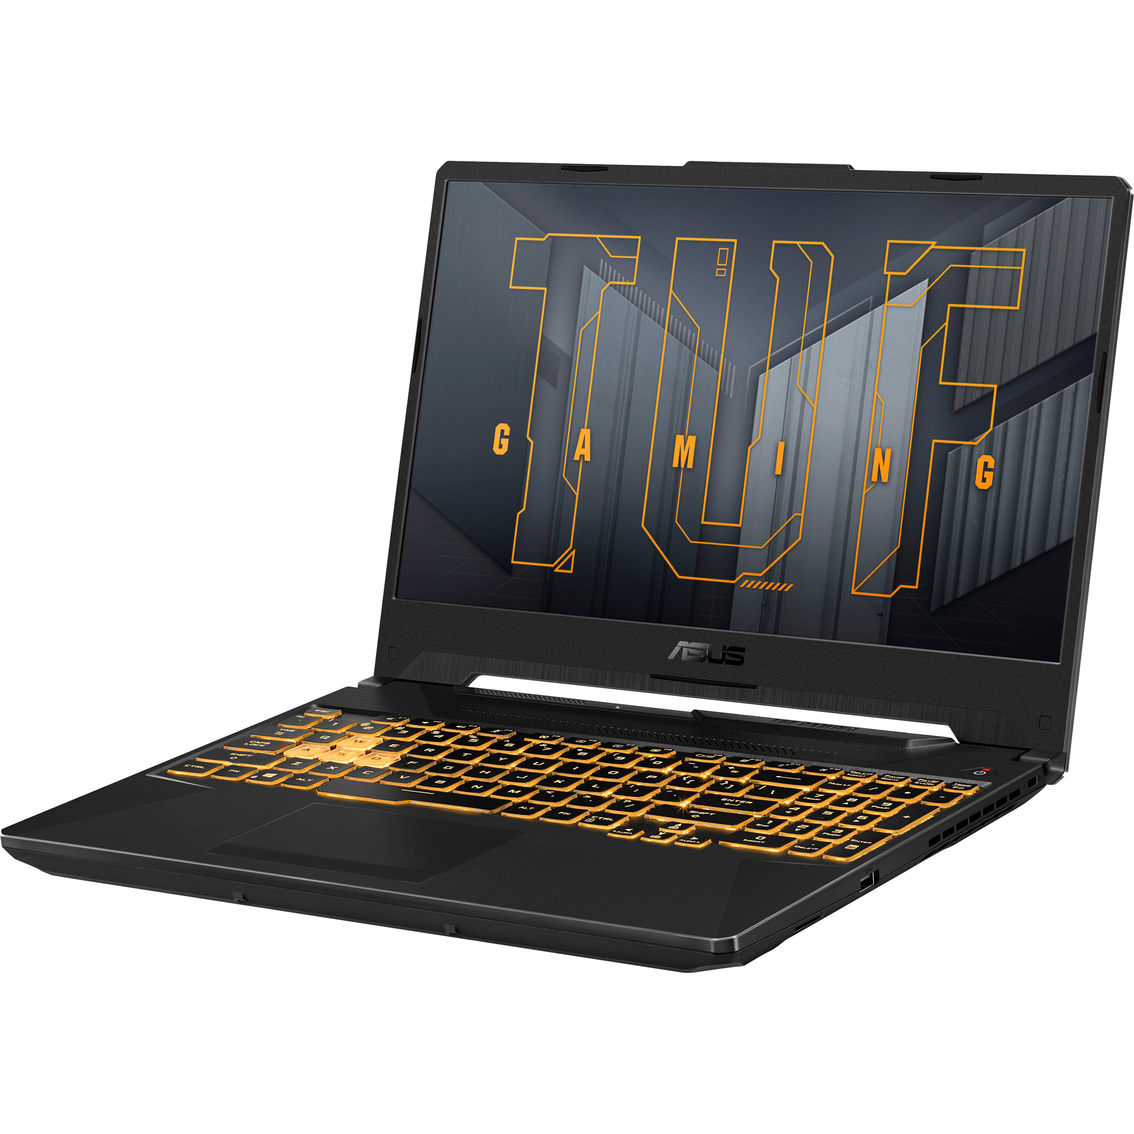 Hp Omen 16 In. Intel Core I7 3.7ghz 16gb Ram 1tb Ssd Gaming Laptop With  Headset, Laptops, Electronics